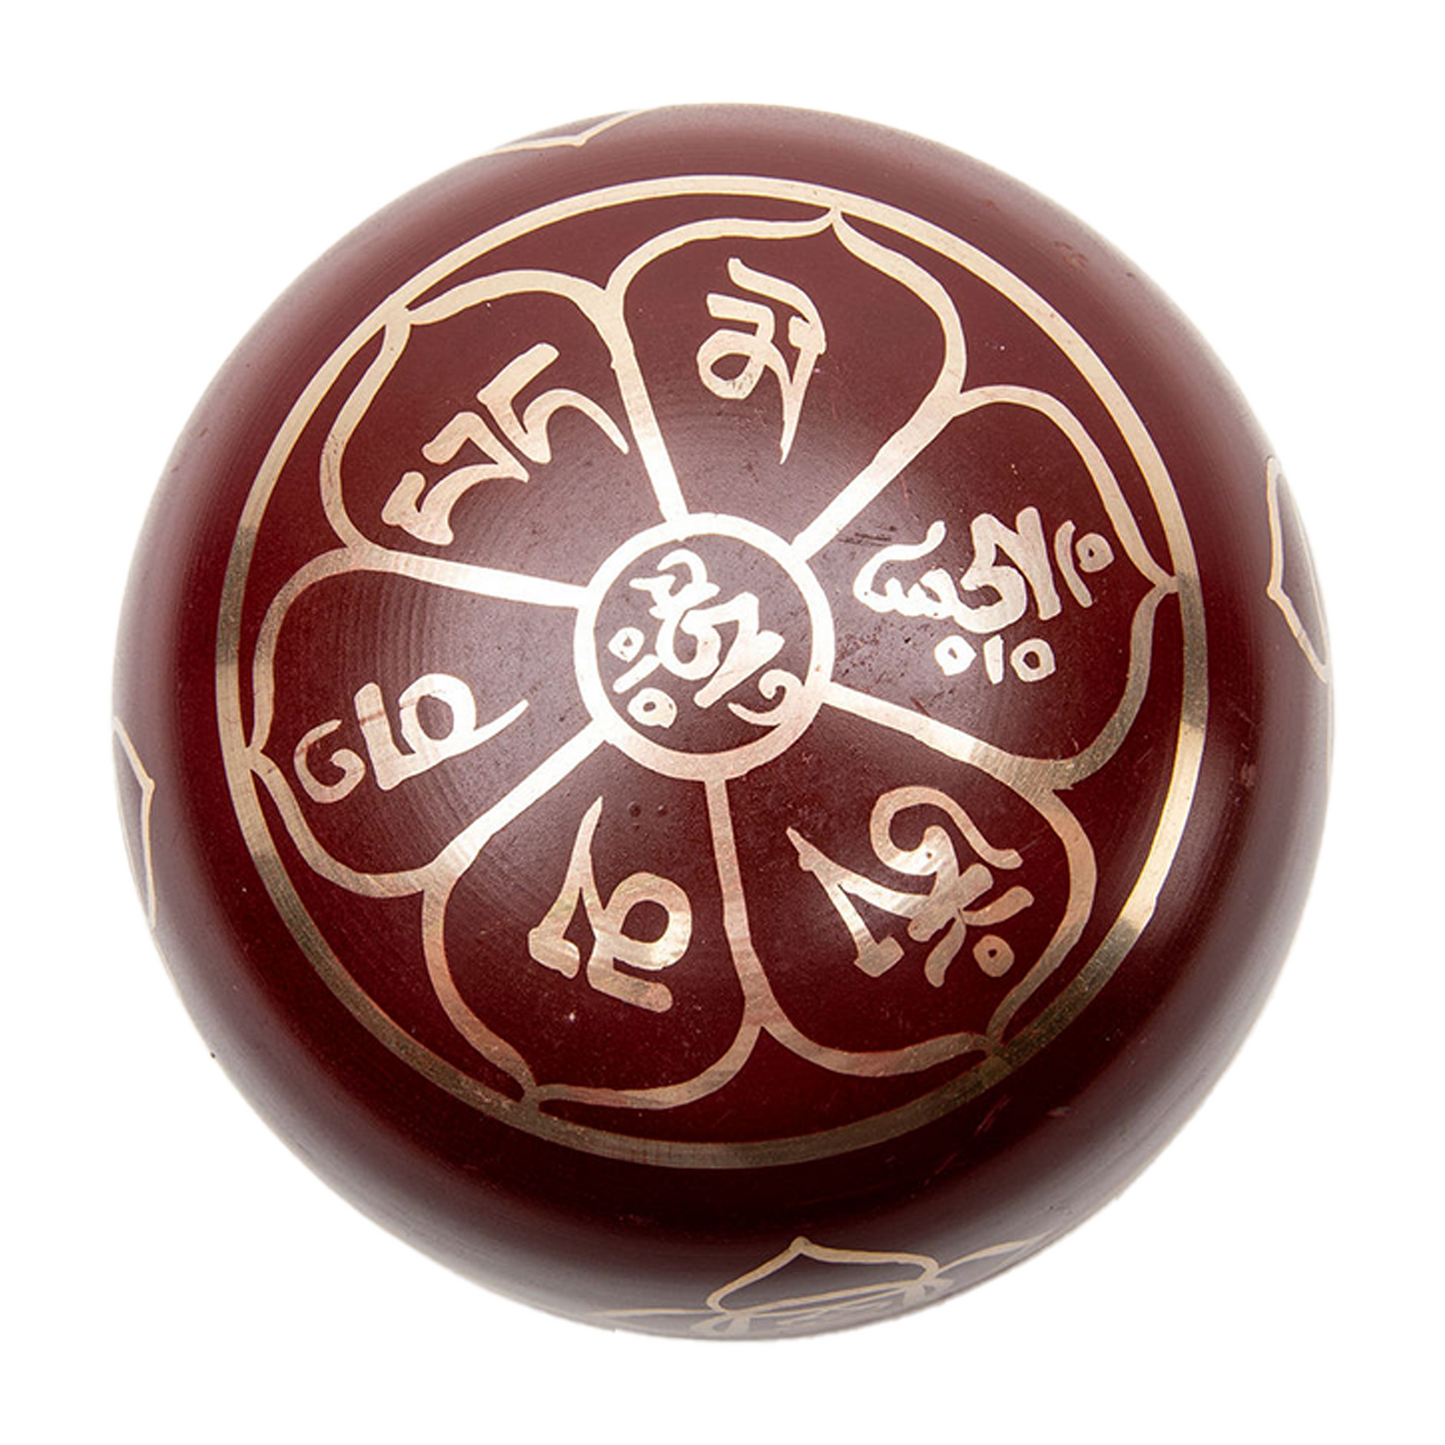 Underside view of the red chakra (root chakra) bowl on a white backdrop.